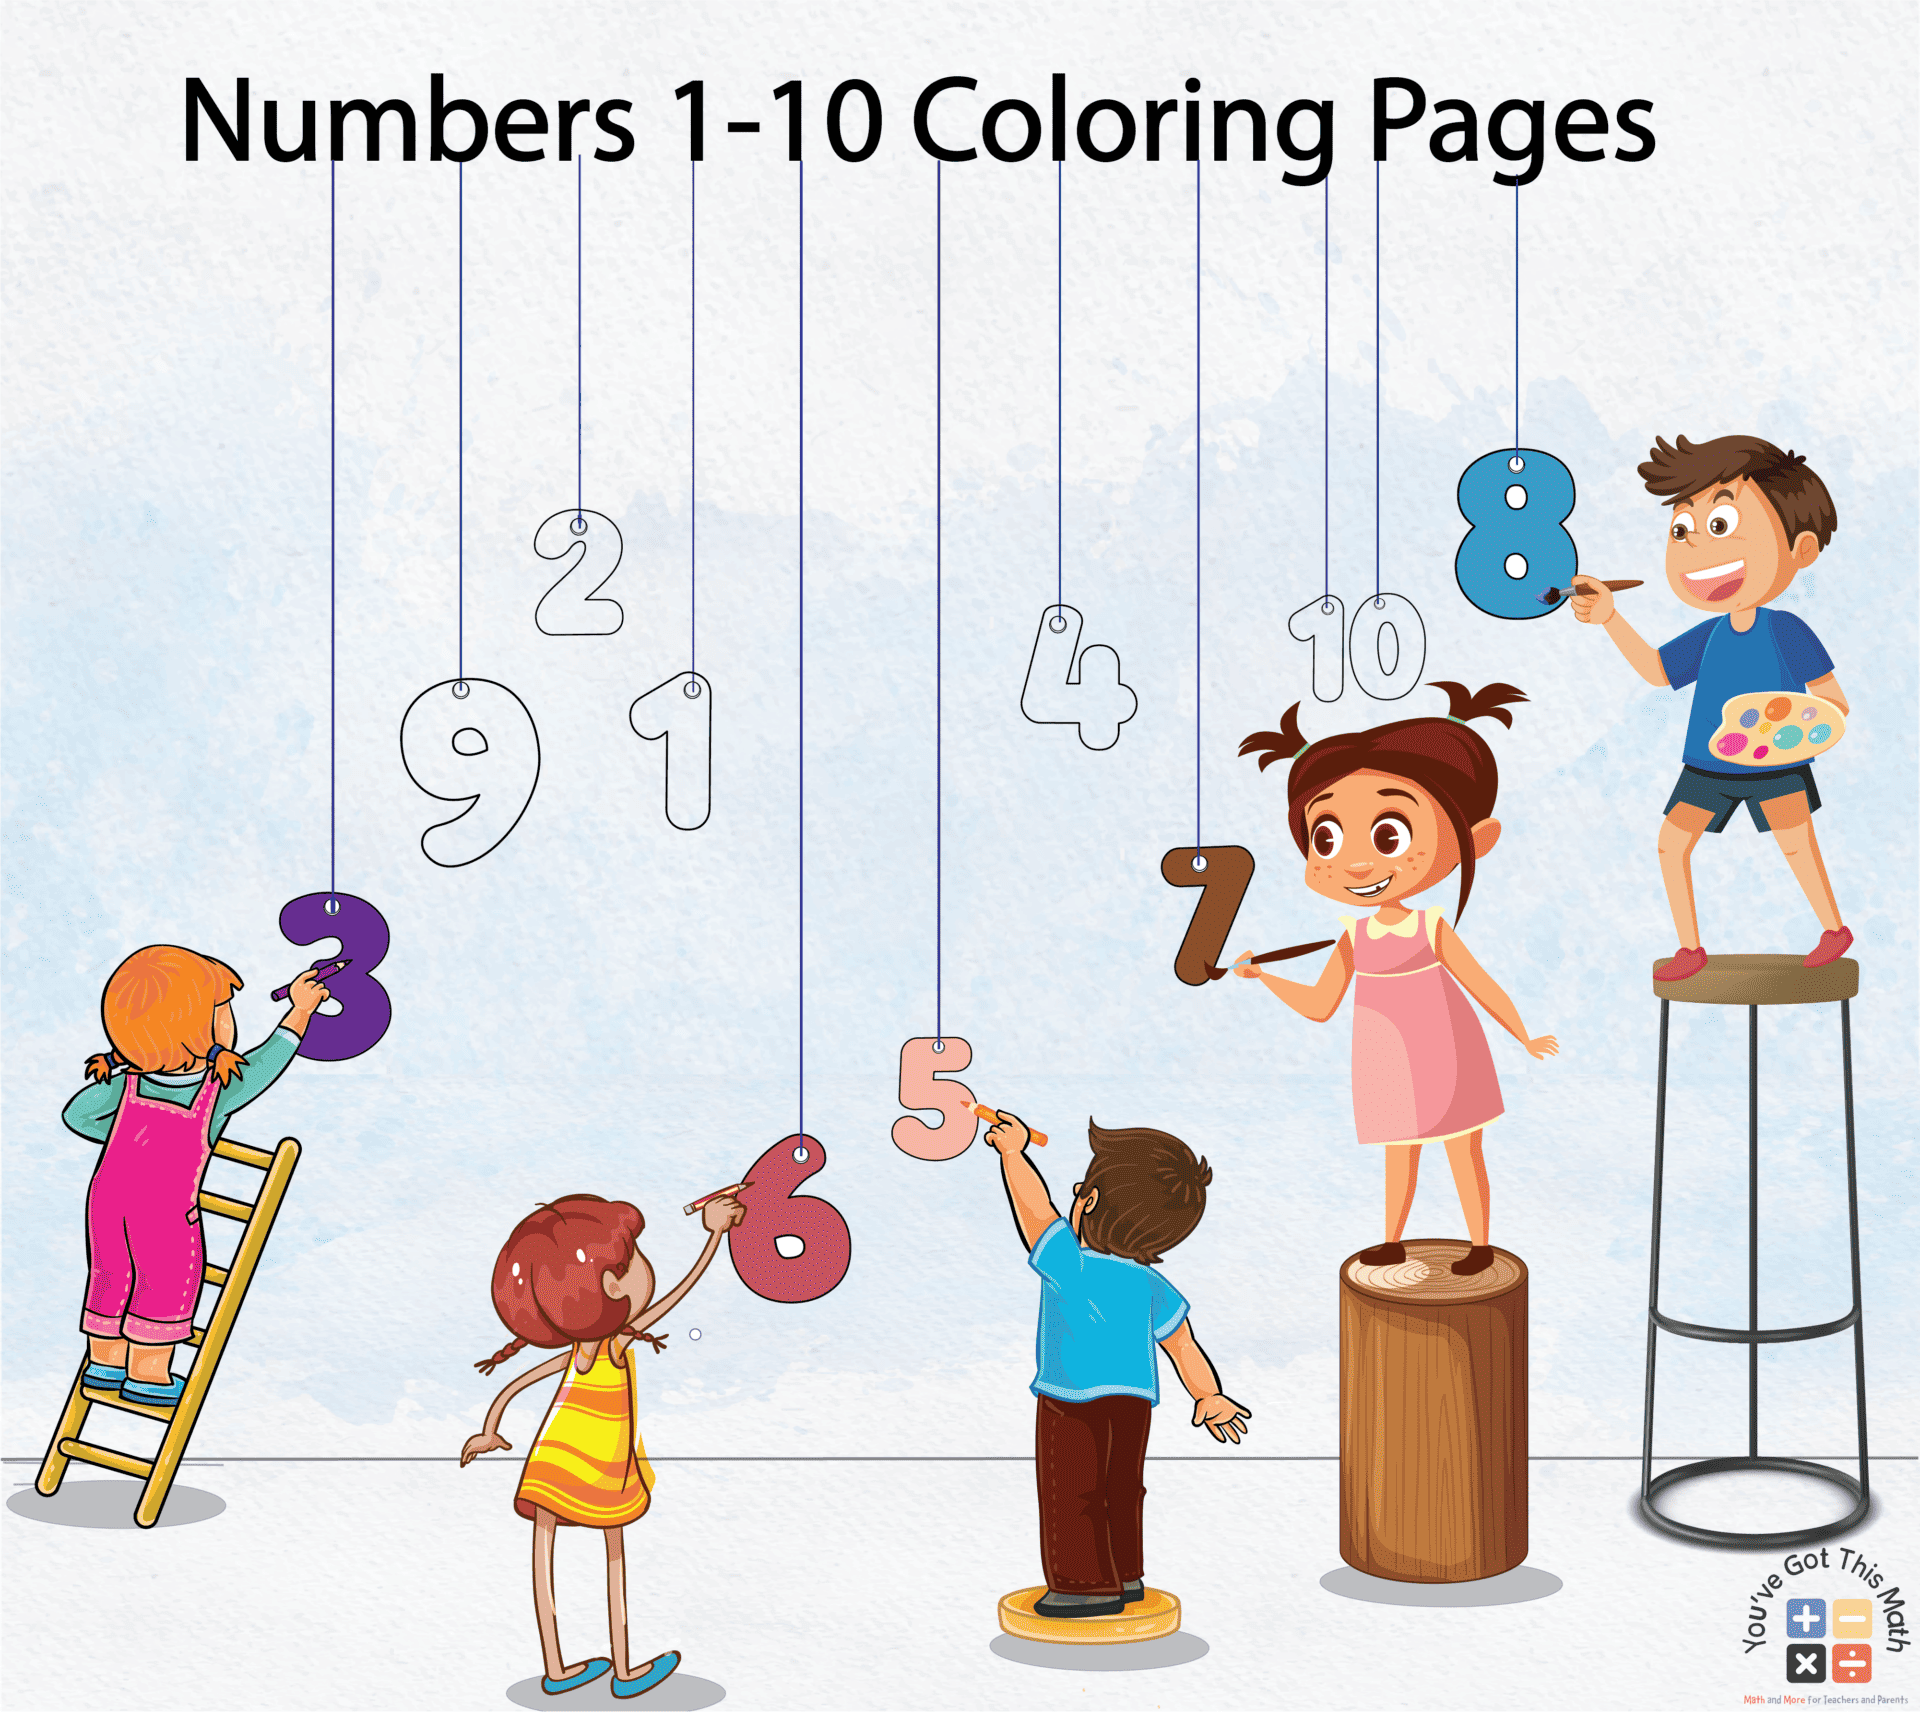 Printable Numbers 1-10 Coloring Pages Overview